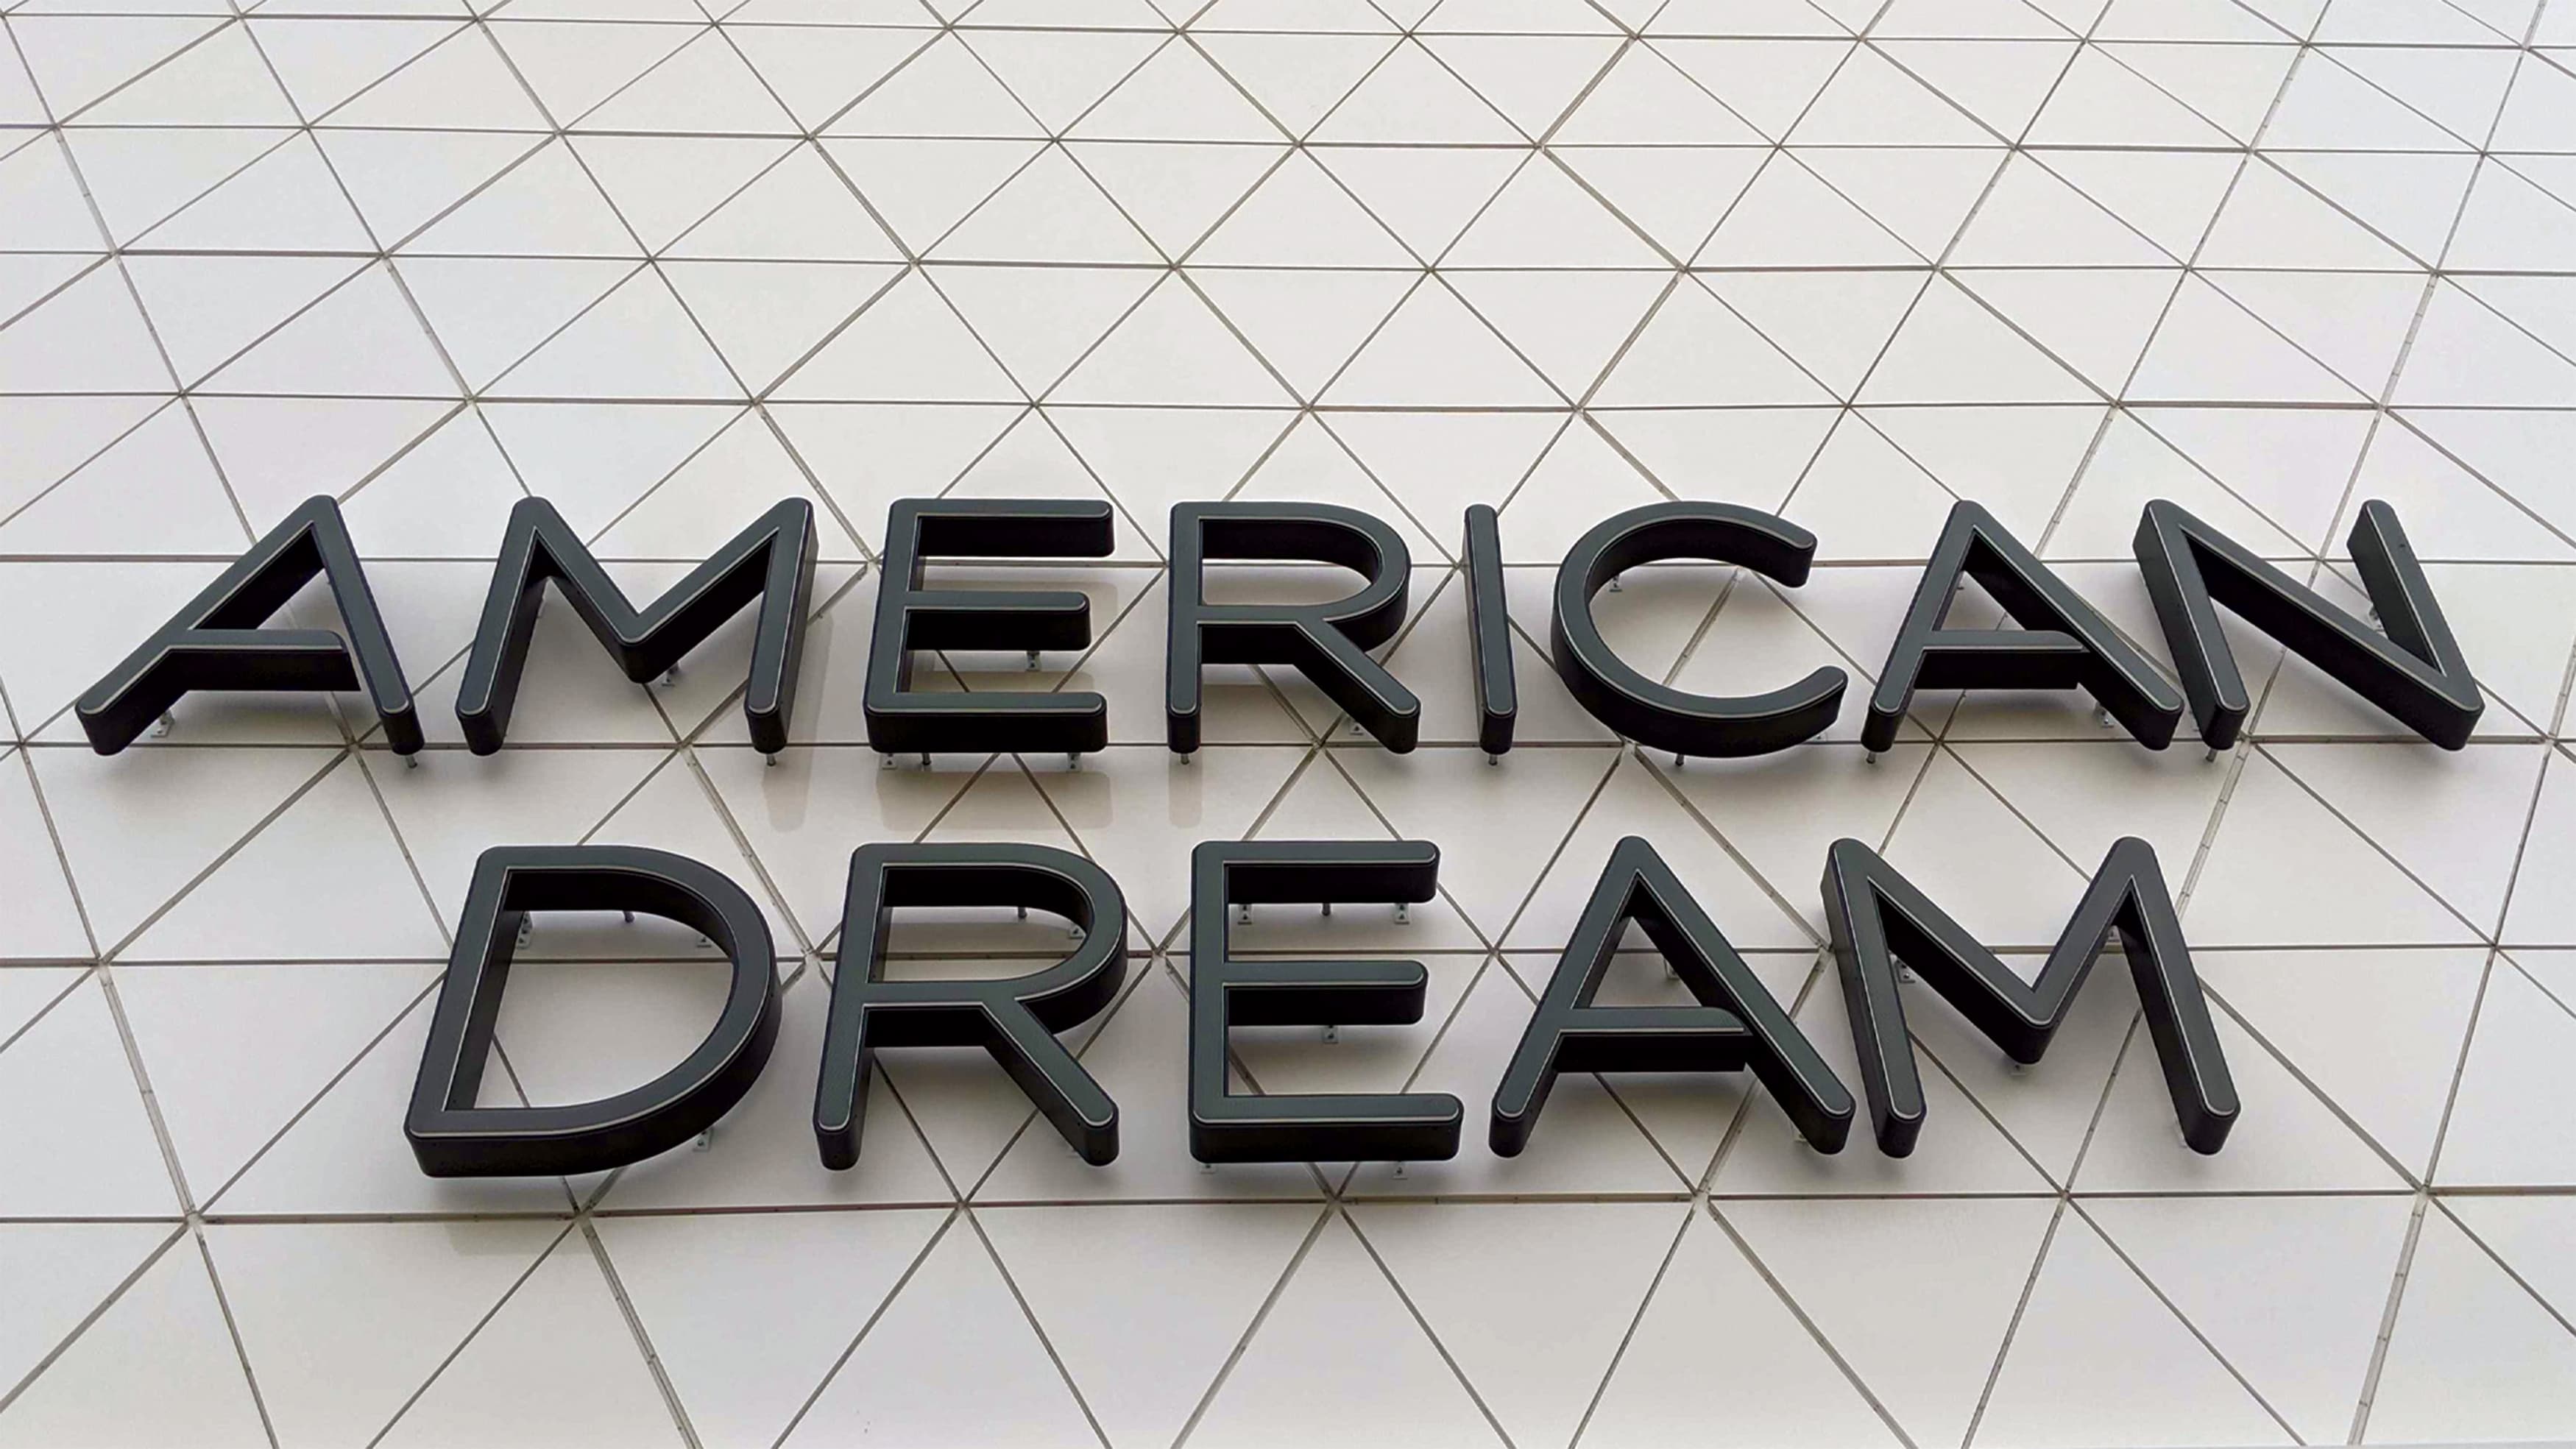 American Dream dimensional identity signage on building facade.